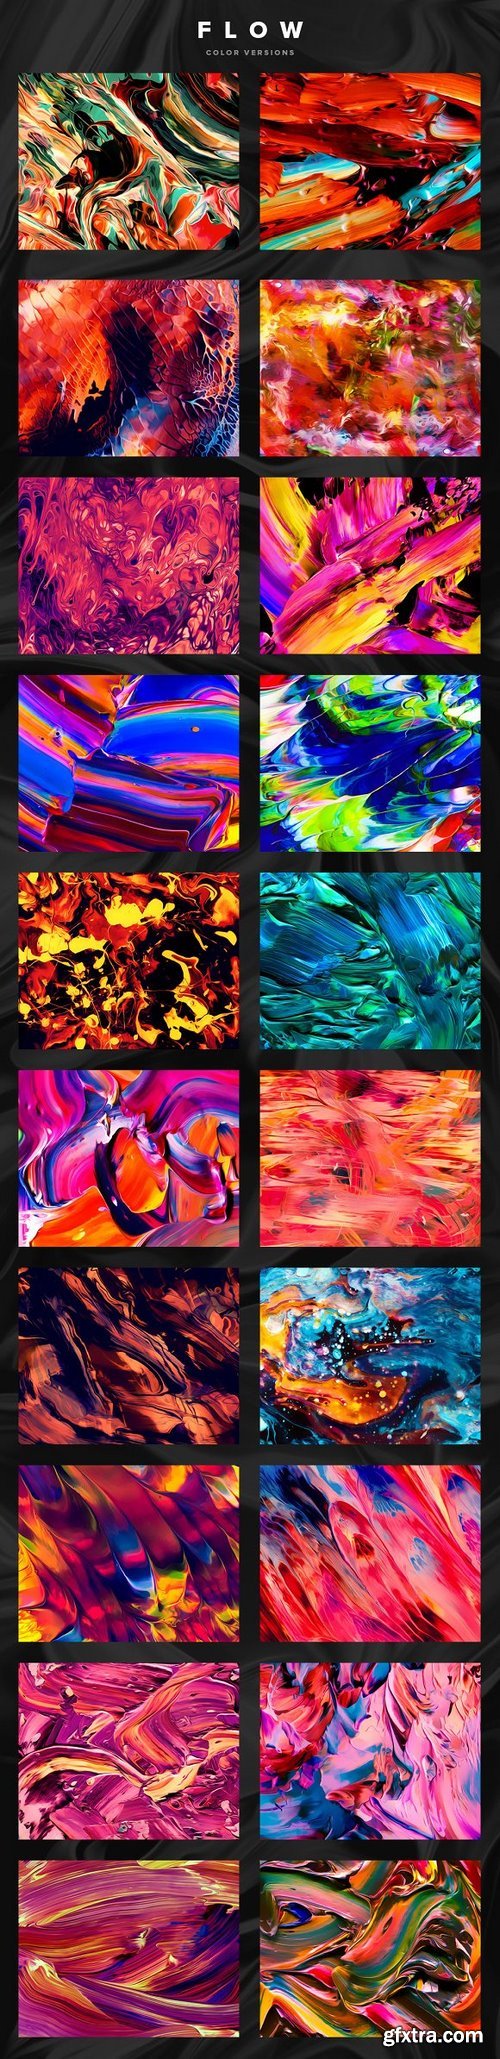 CM - Flow: 100 fluid abstract paintings 1631334